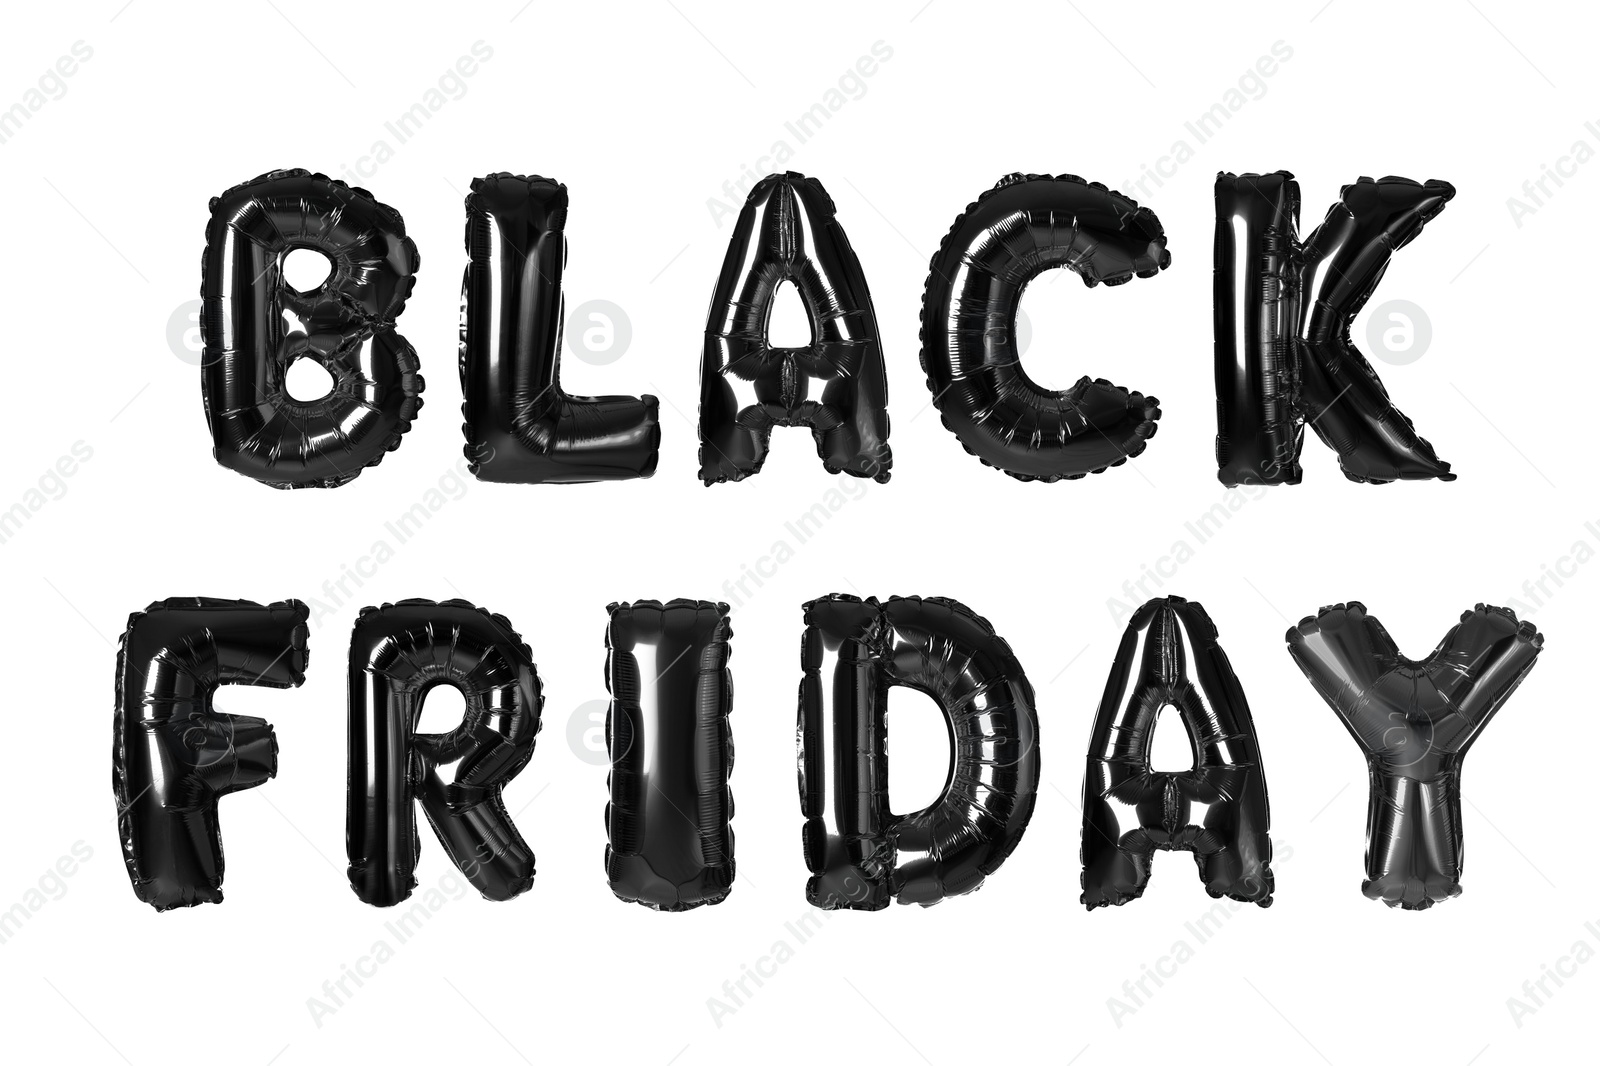 Image of Text BLACK FRIDAY made of foil balloons on white background